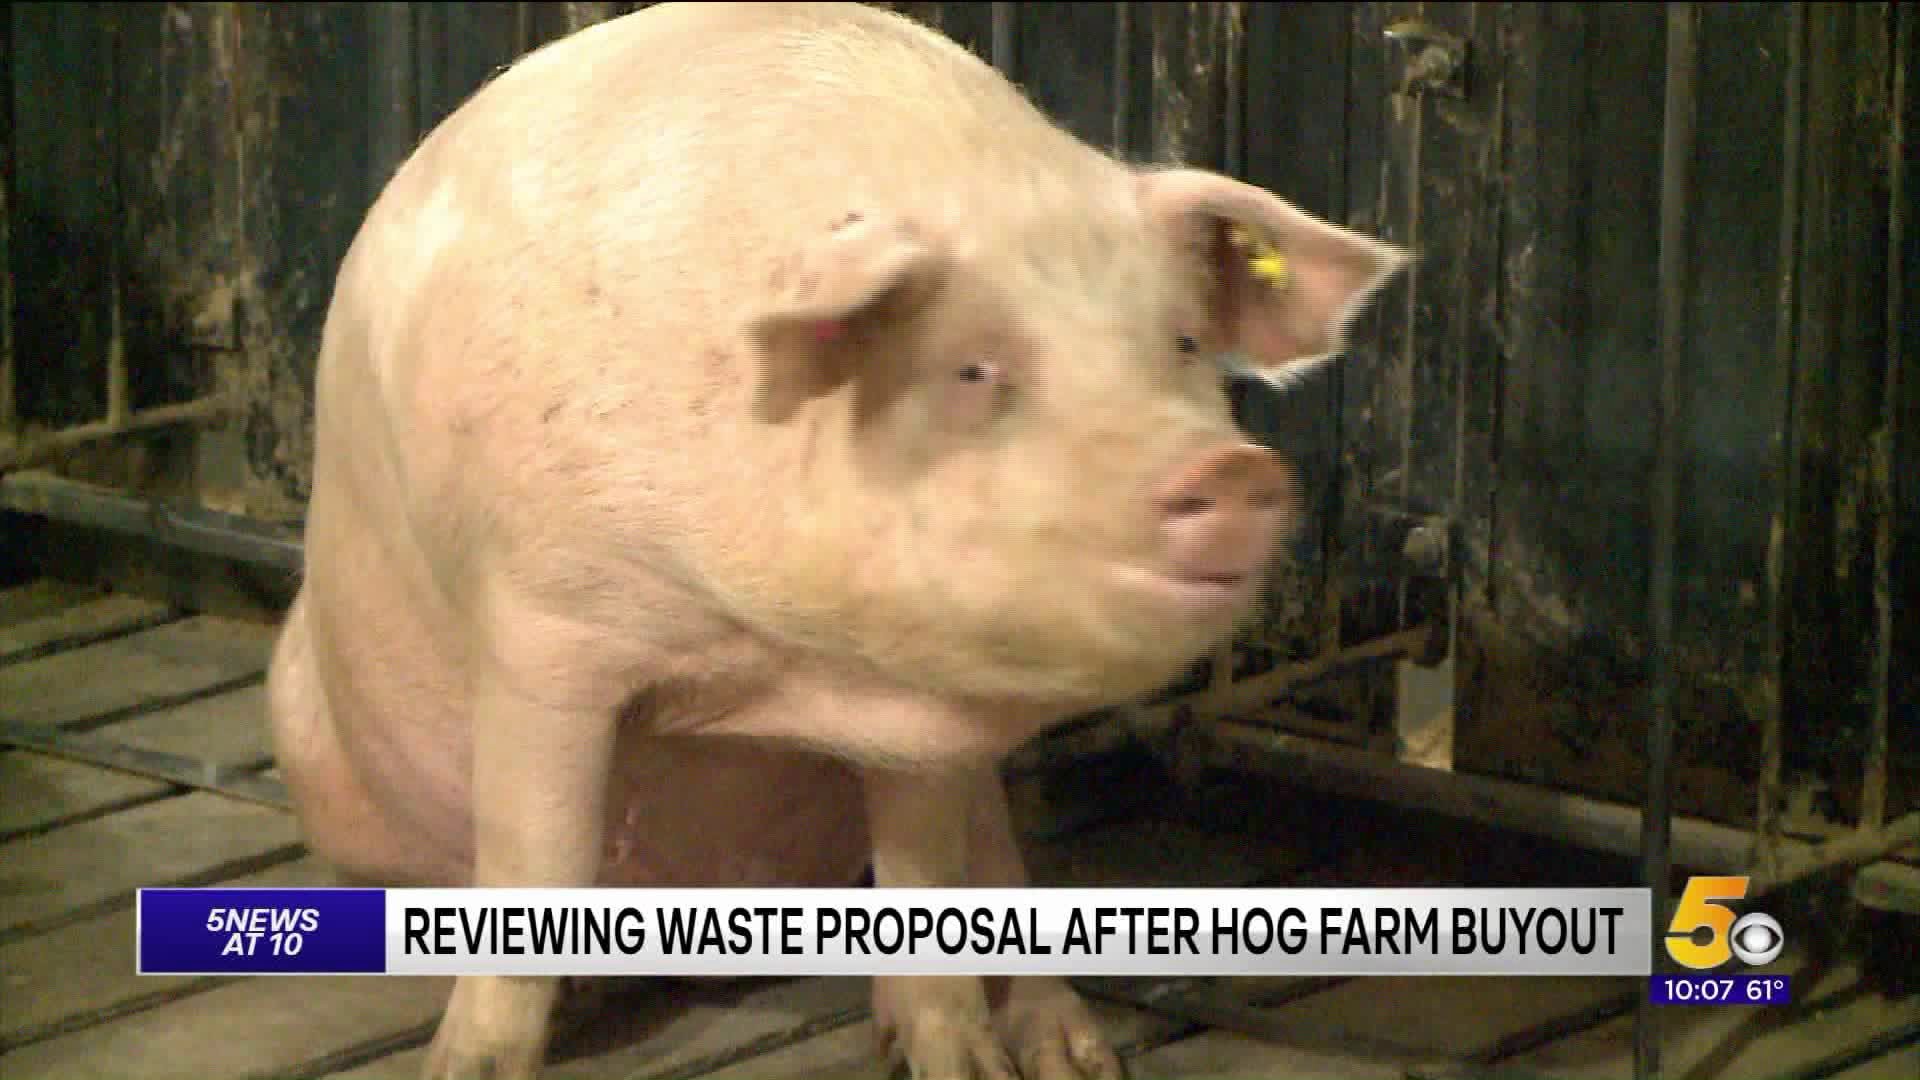 Reviewing Waste Proposal After Hog Farm Buyout